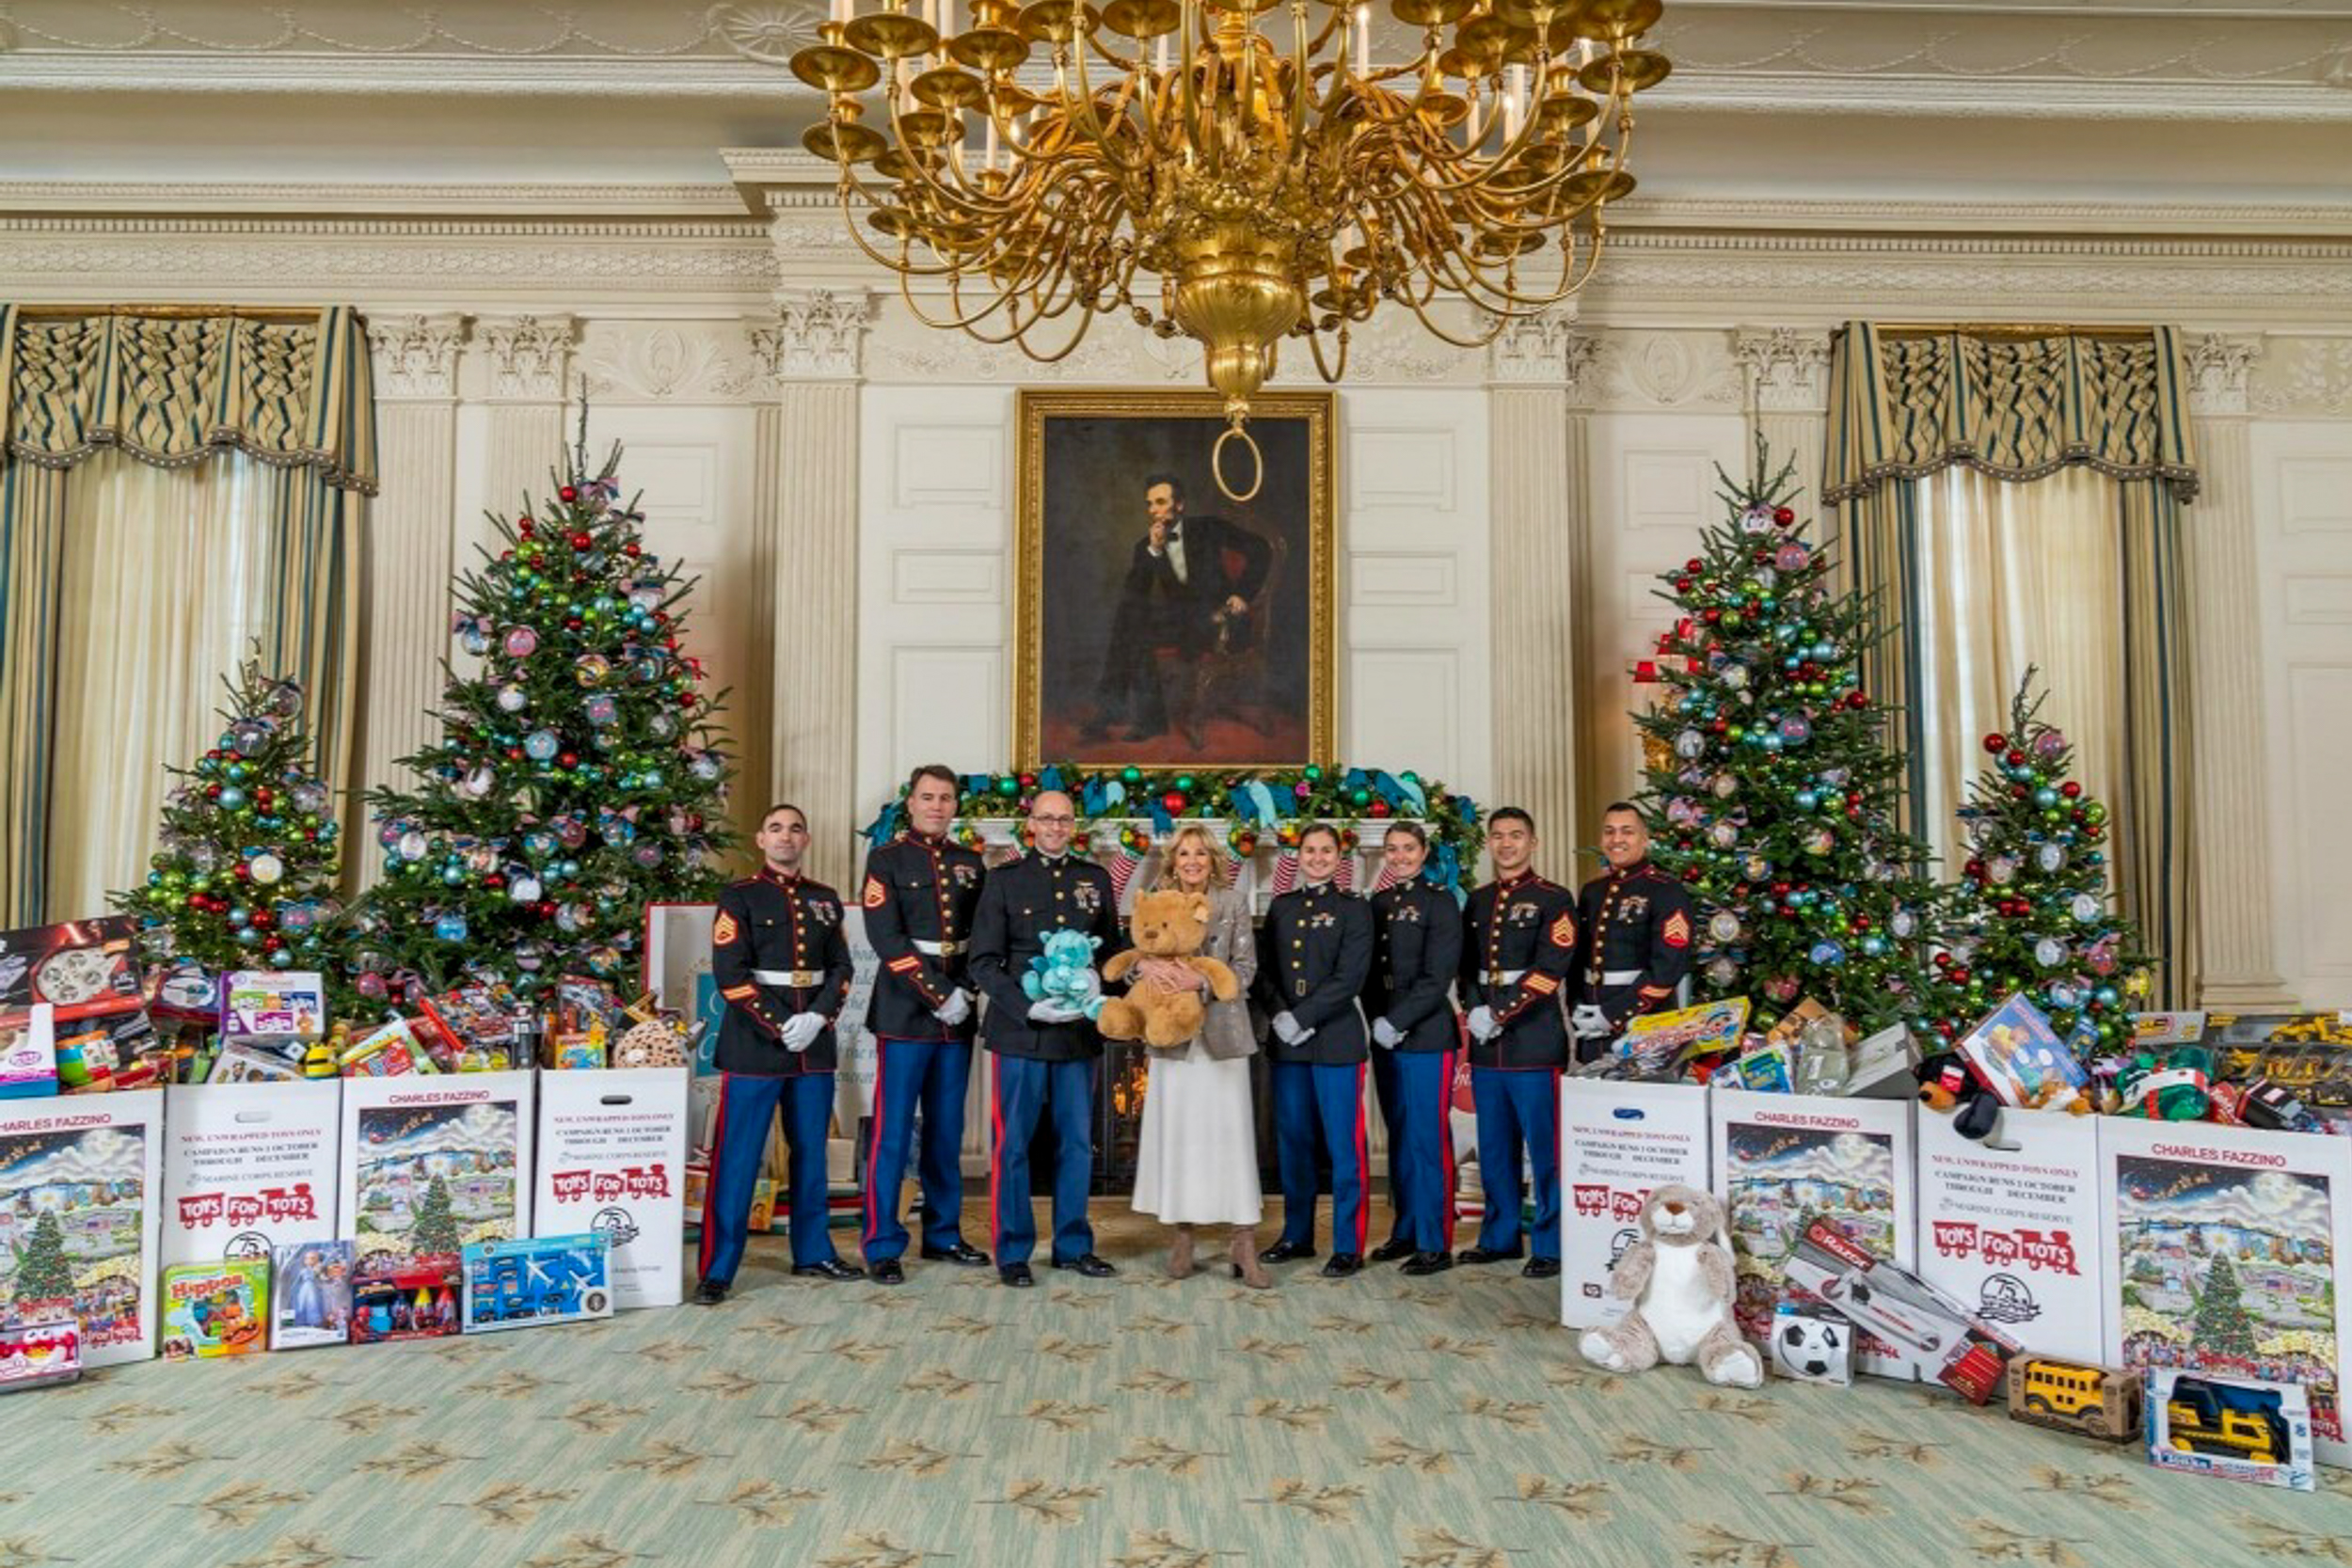 Members of the US Marines stand on either side of First Lady Dr. Jill Biden, surrounded by toys for tots donations at the white house